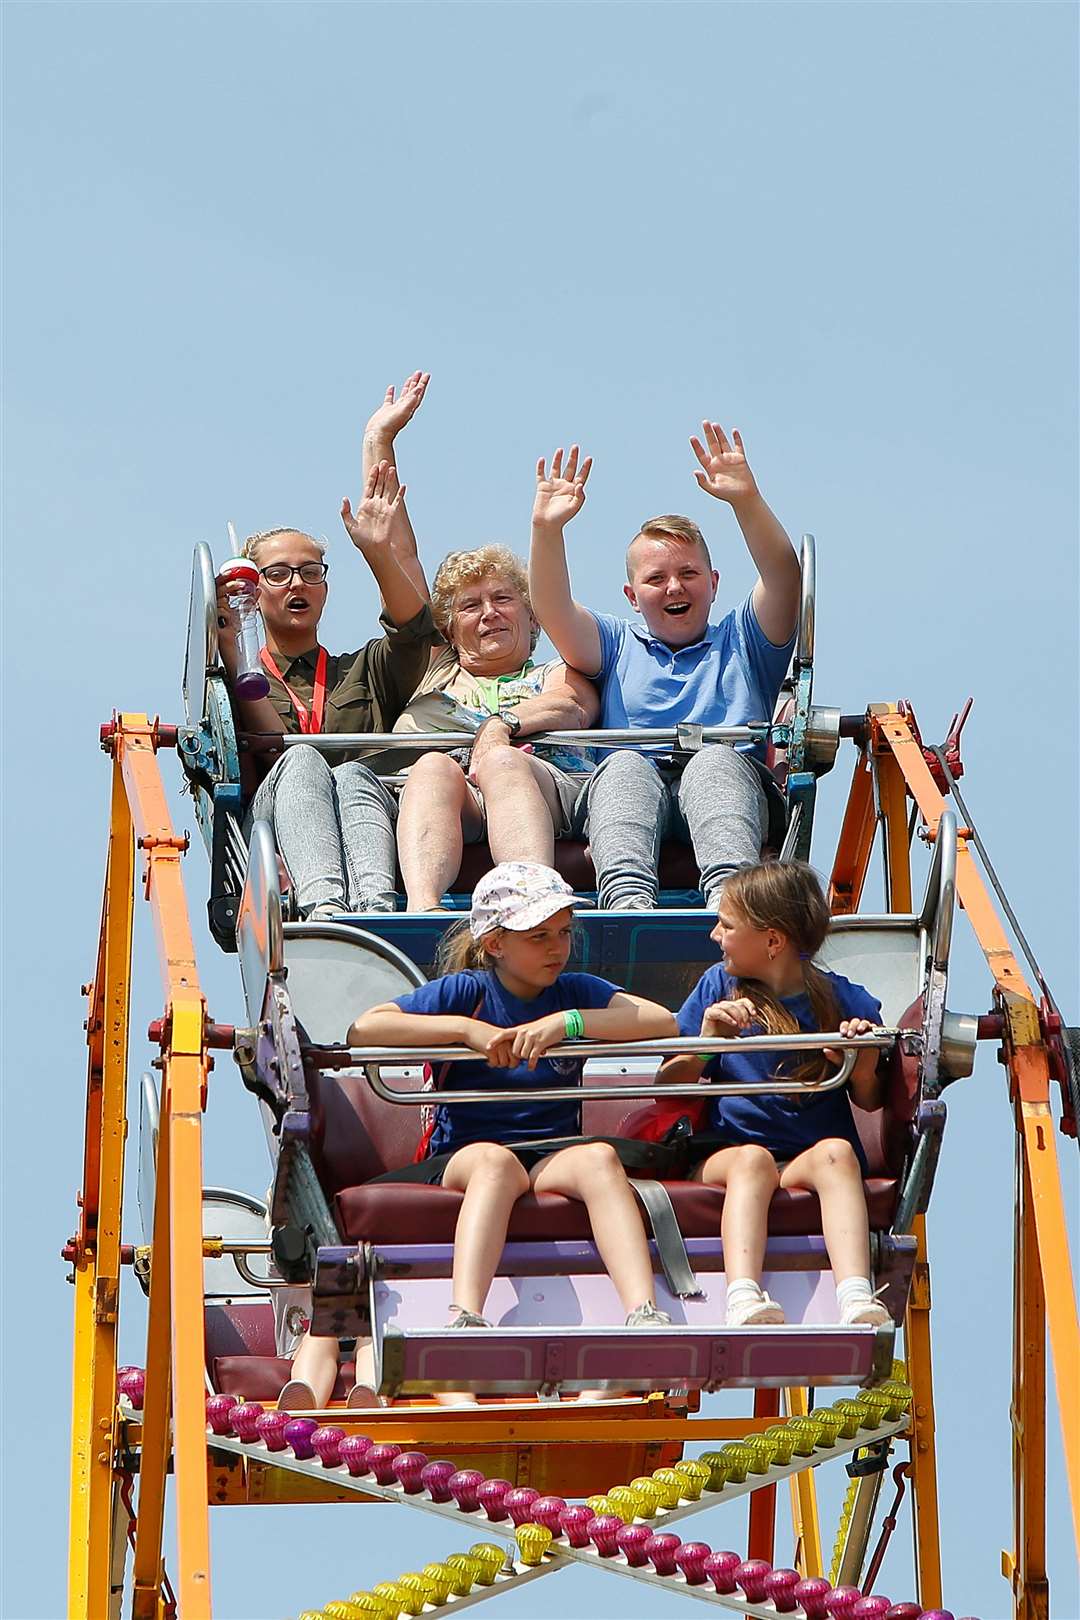 Visitors are riding high in the fairground